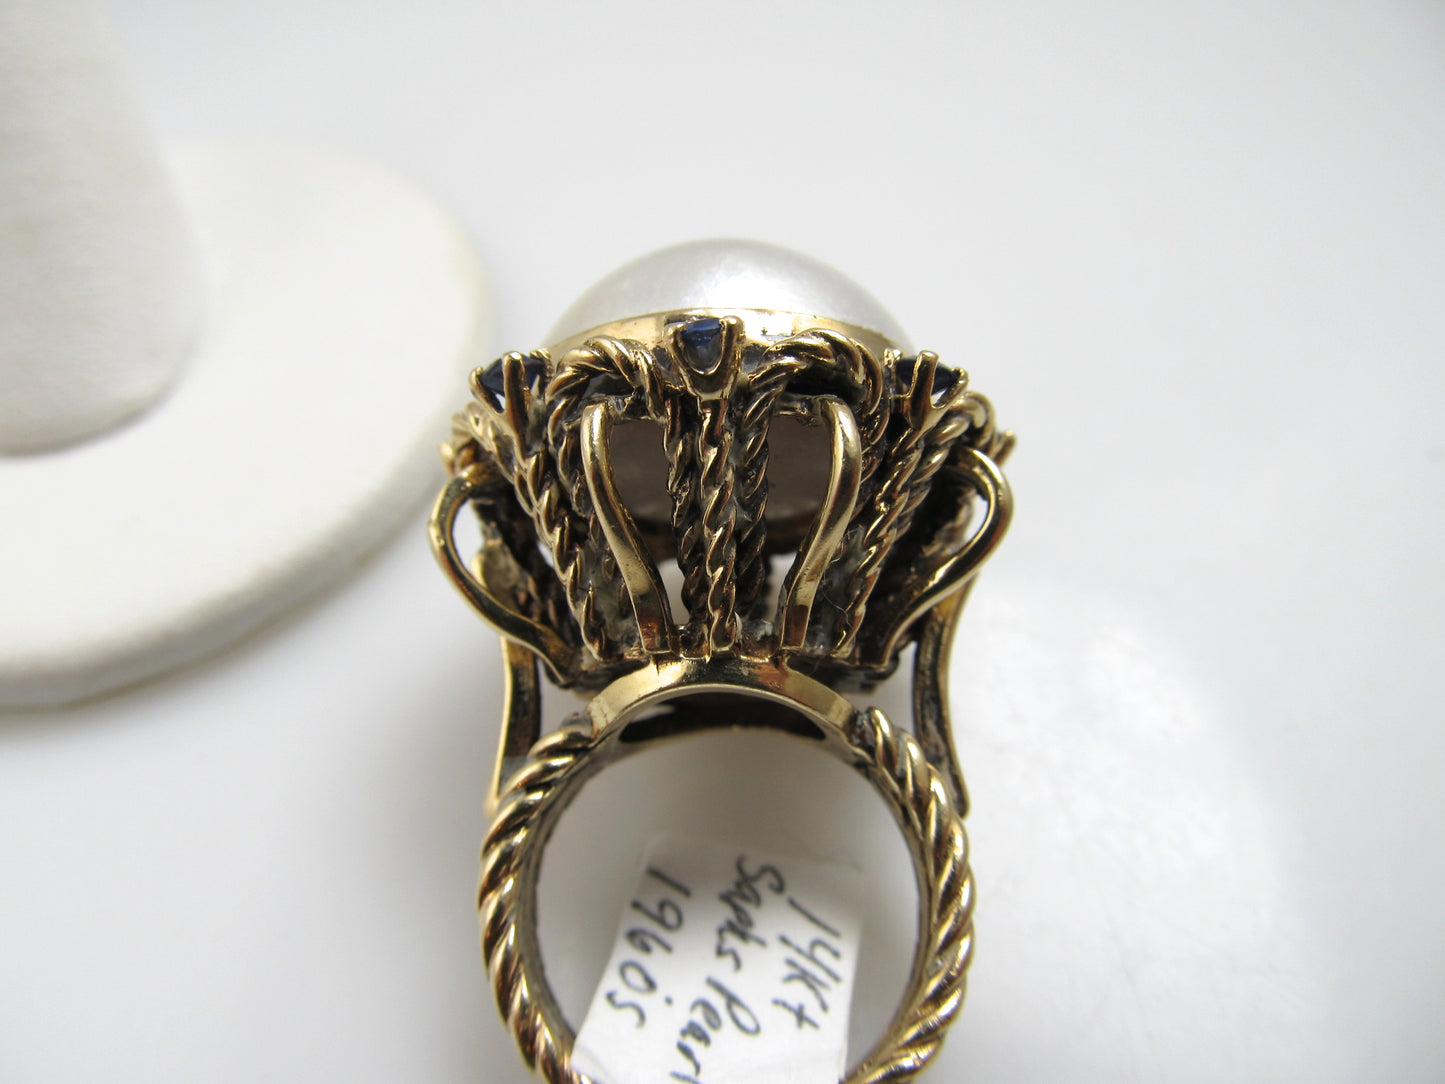 14k Yellow Gold Ring With Sapphires And A Large Mabe Pearl, Circa 1960